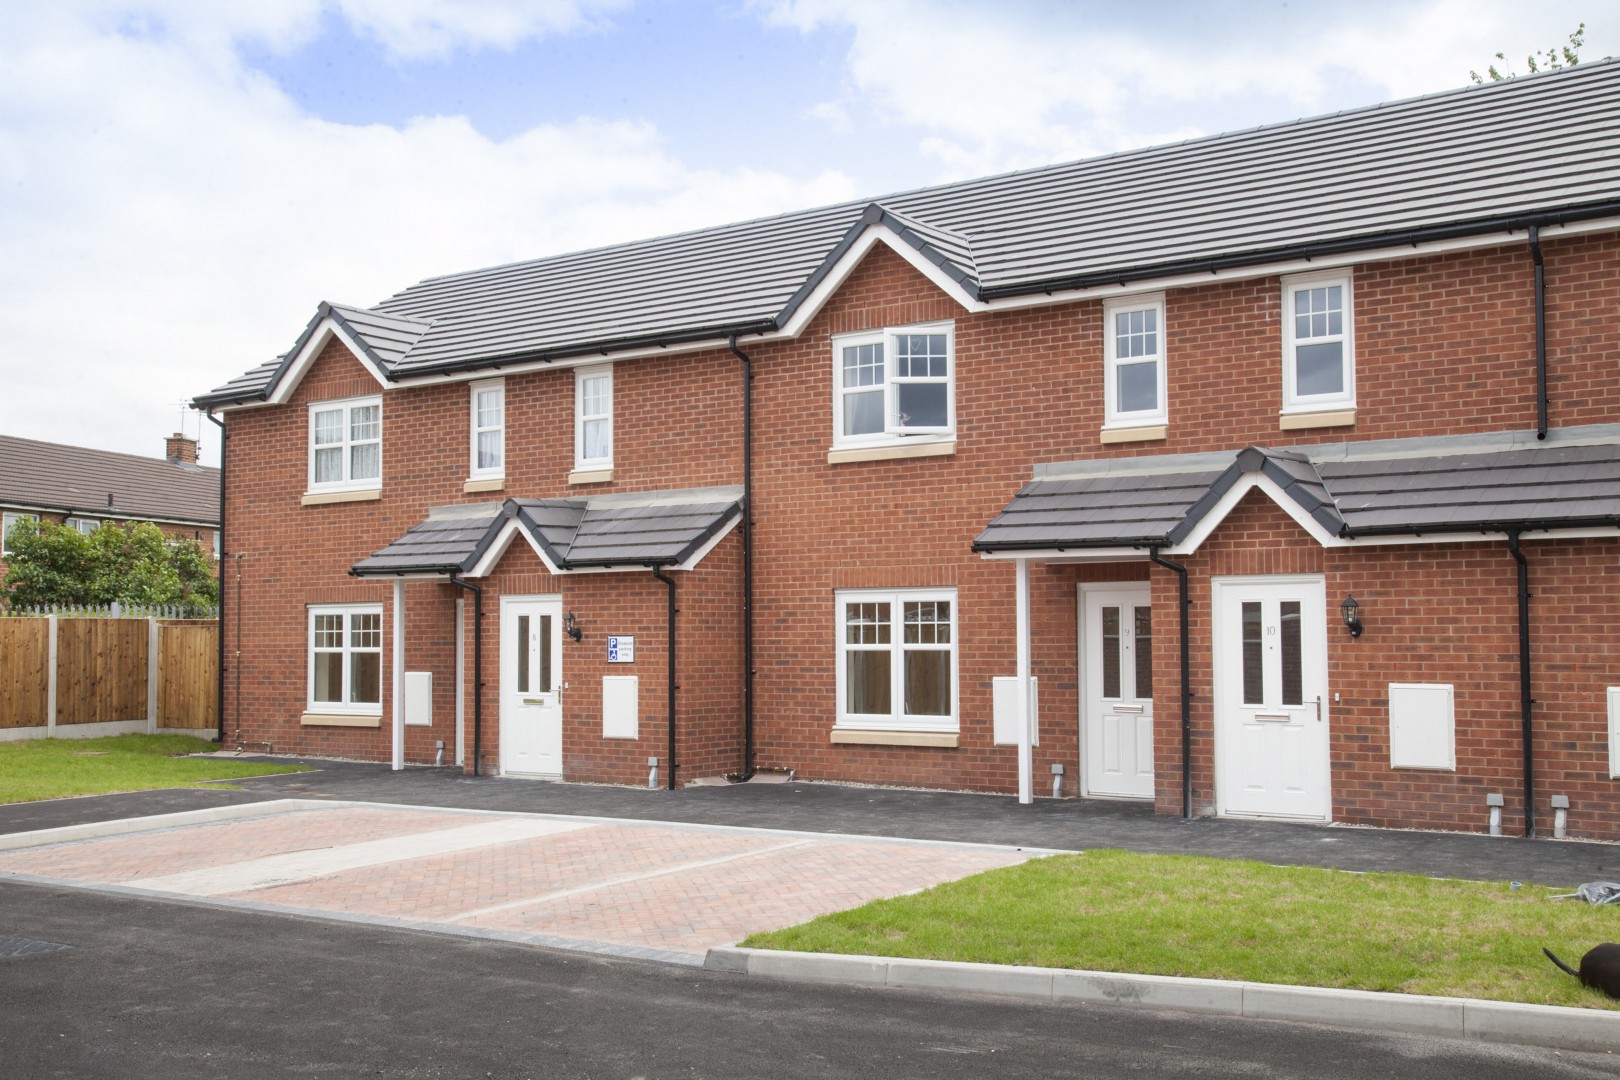 NEWS | County moves step closer to new affordable housing